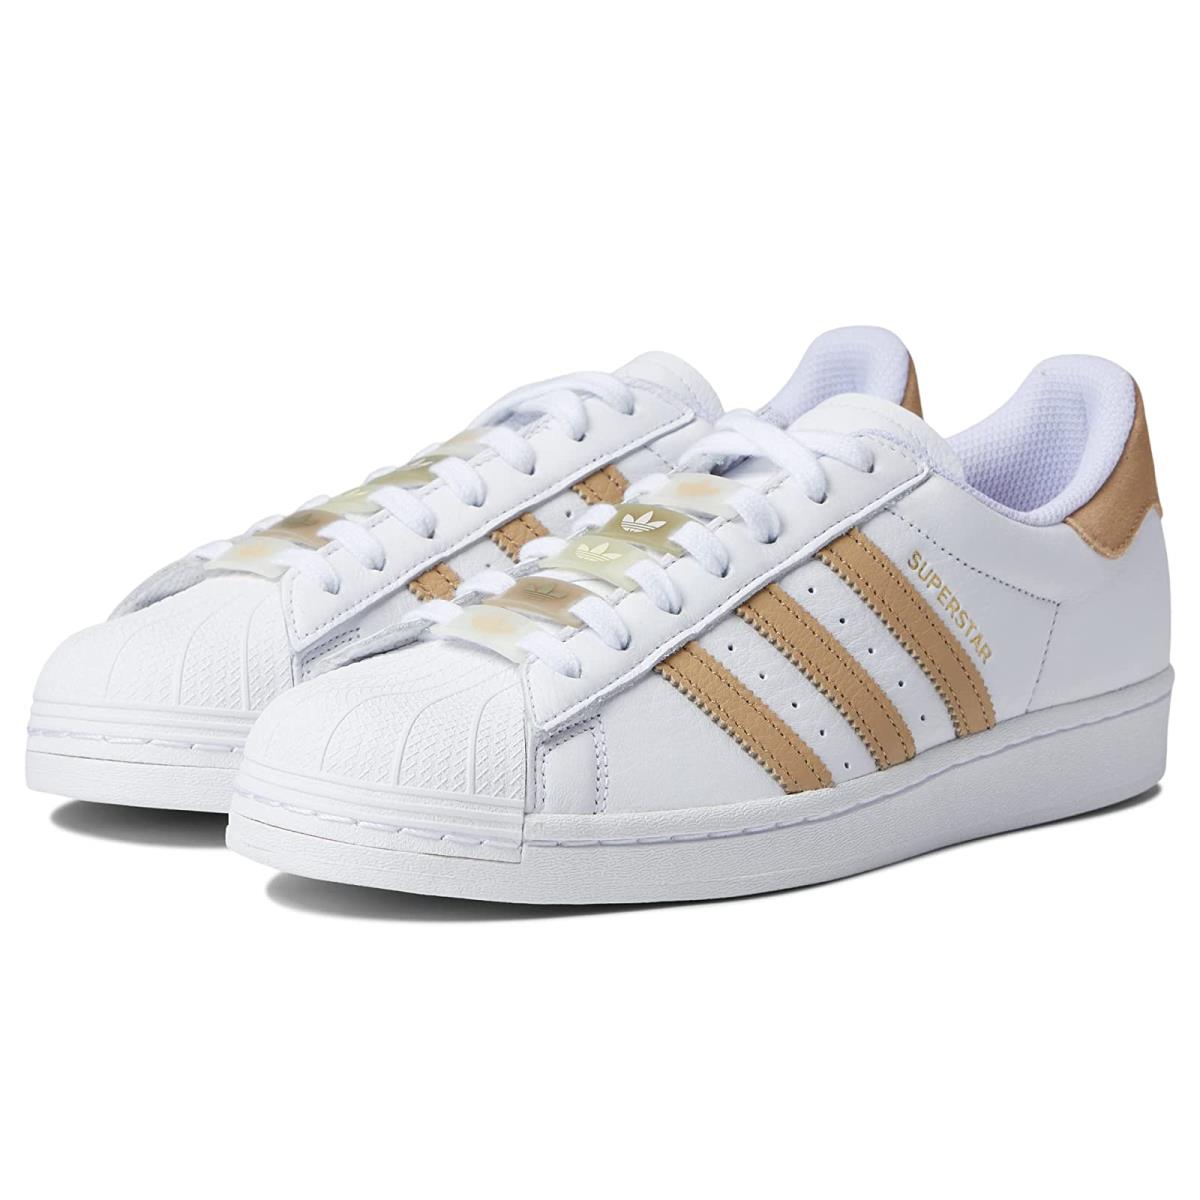 Woman`s Sneakers Athletic Shoes Adidas Originals Superstar W White/St Pale Nude/White